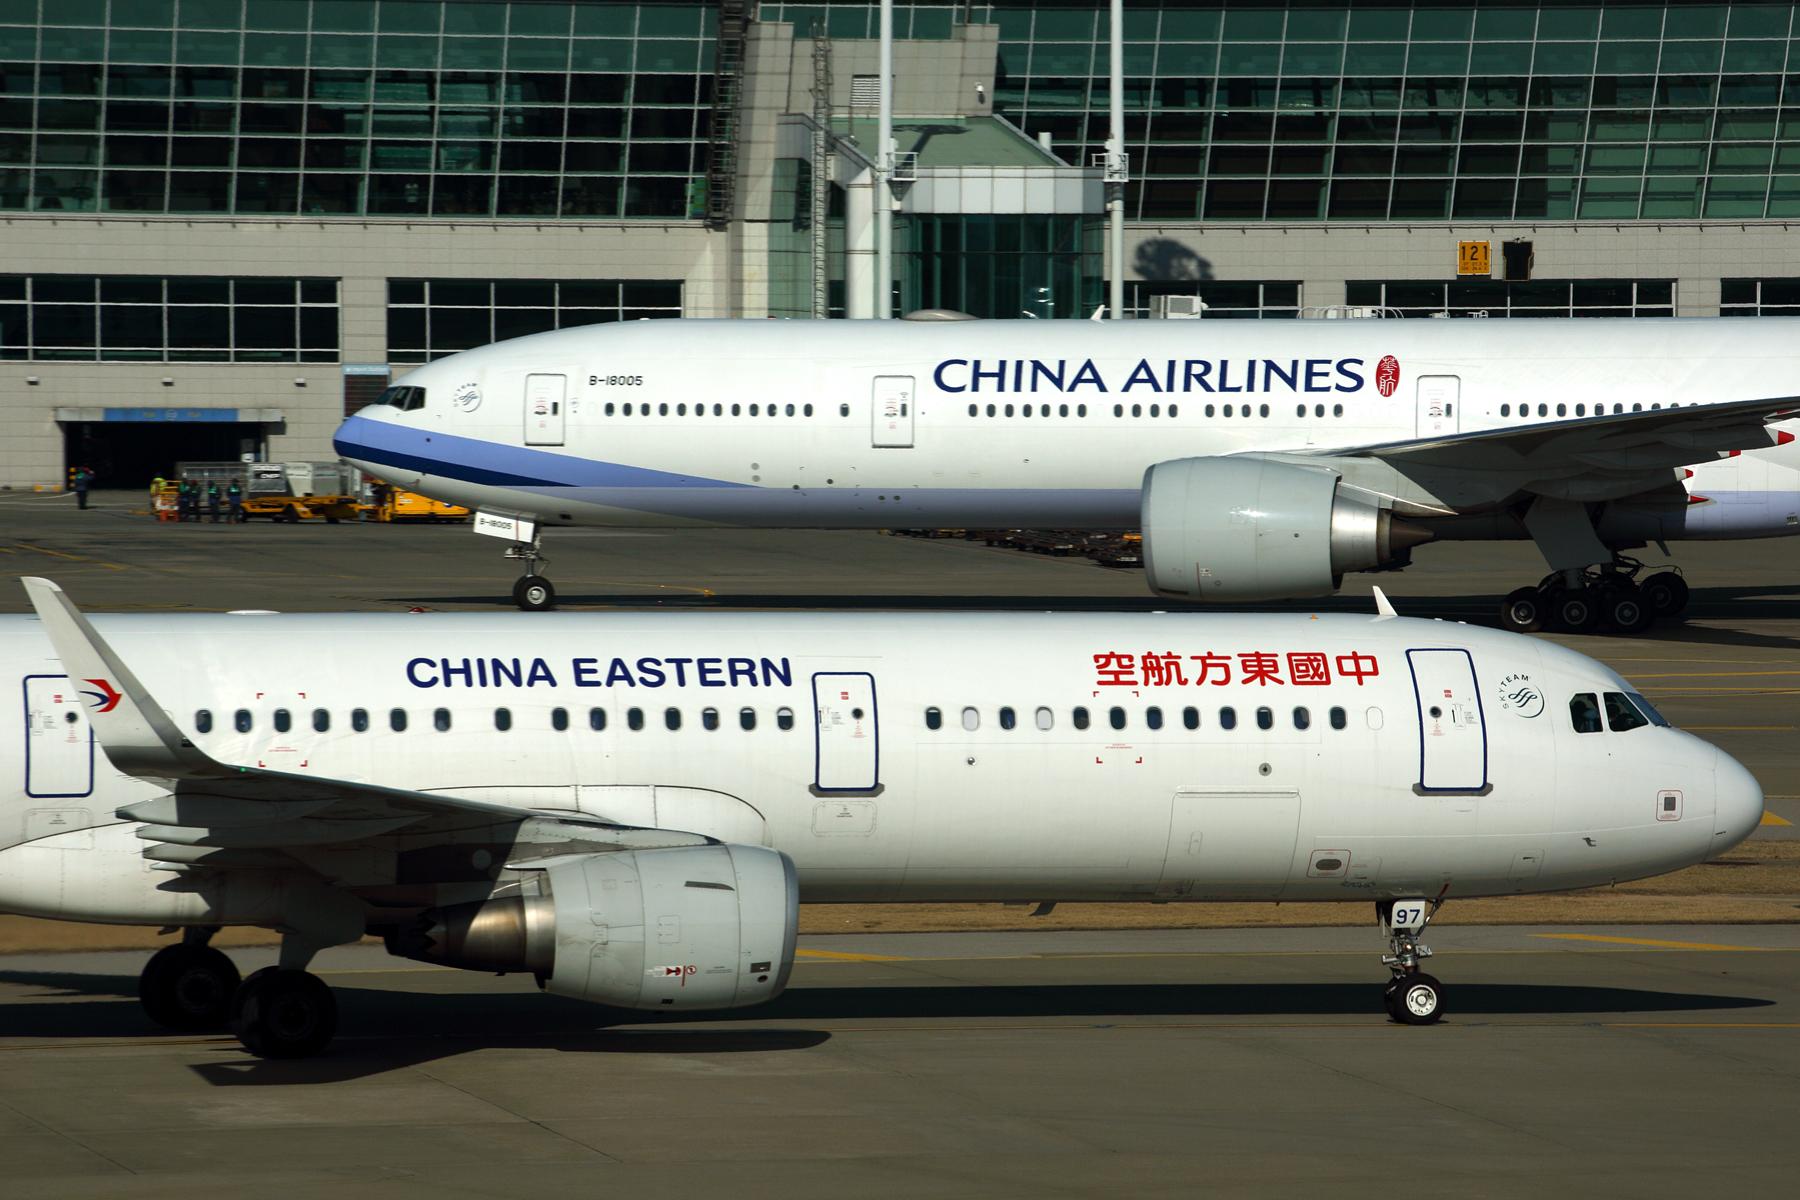 China eastern and China airlines